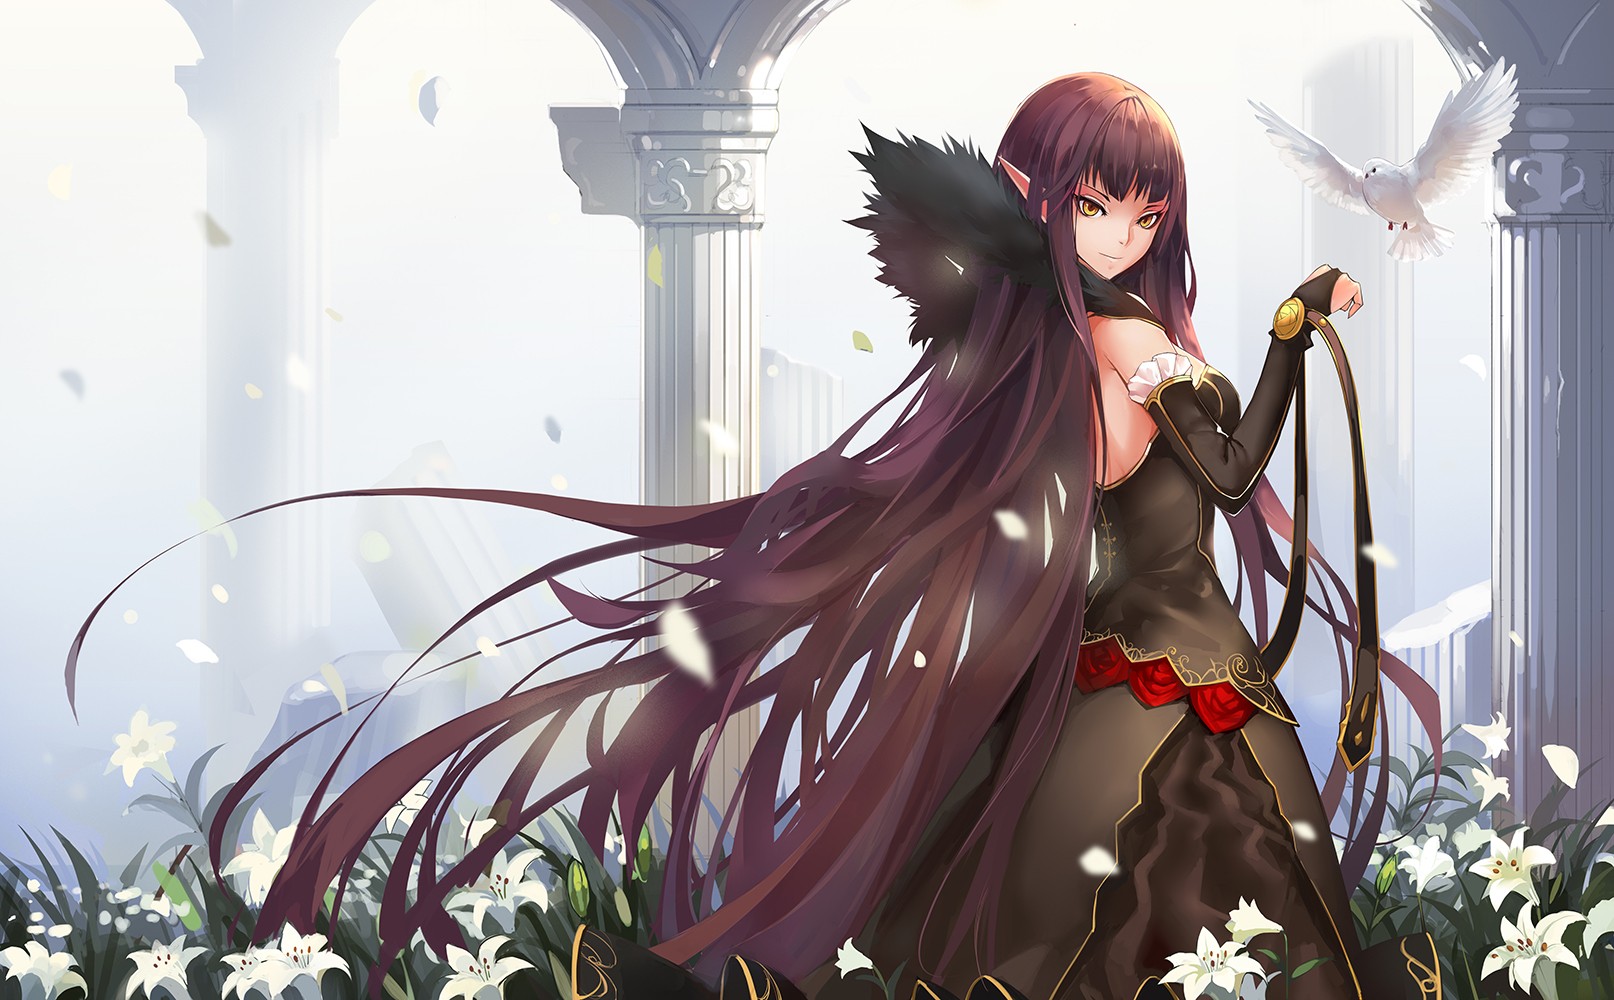 Assassin of red semiramis fateapocrypha fateapocrypha anime girls long hair fate series anime